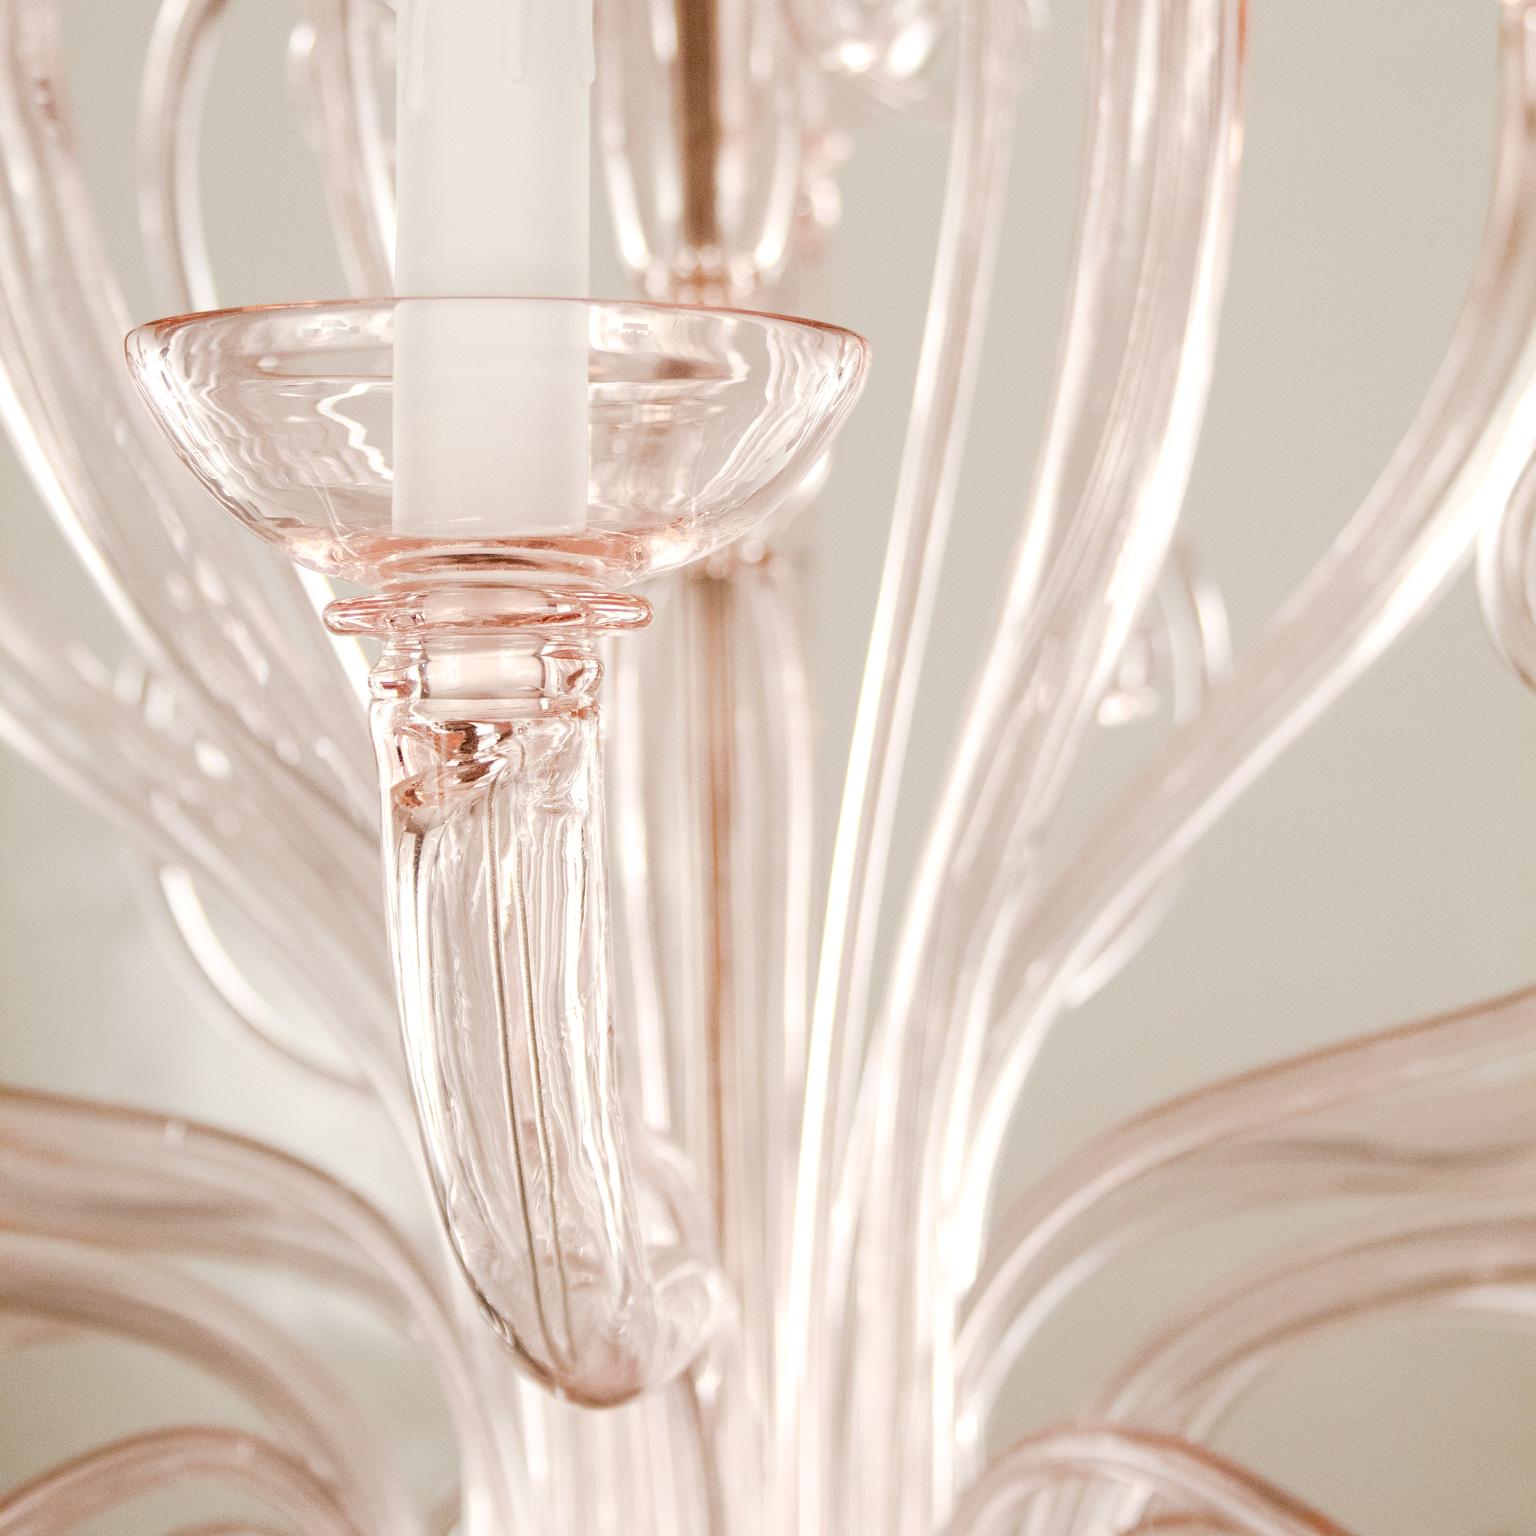 Melisanda is a venetian glass chandelier characterized by a romantic and delicate pink shade. This is one of the new lighting products by Multiforme it's inspired by the design of Classic chandeliers but adding something new, fully in tune with the